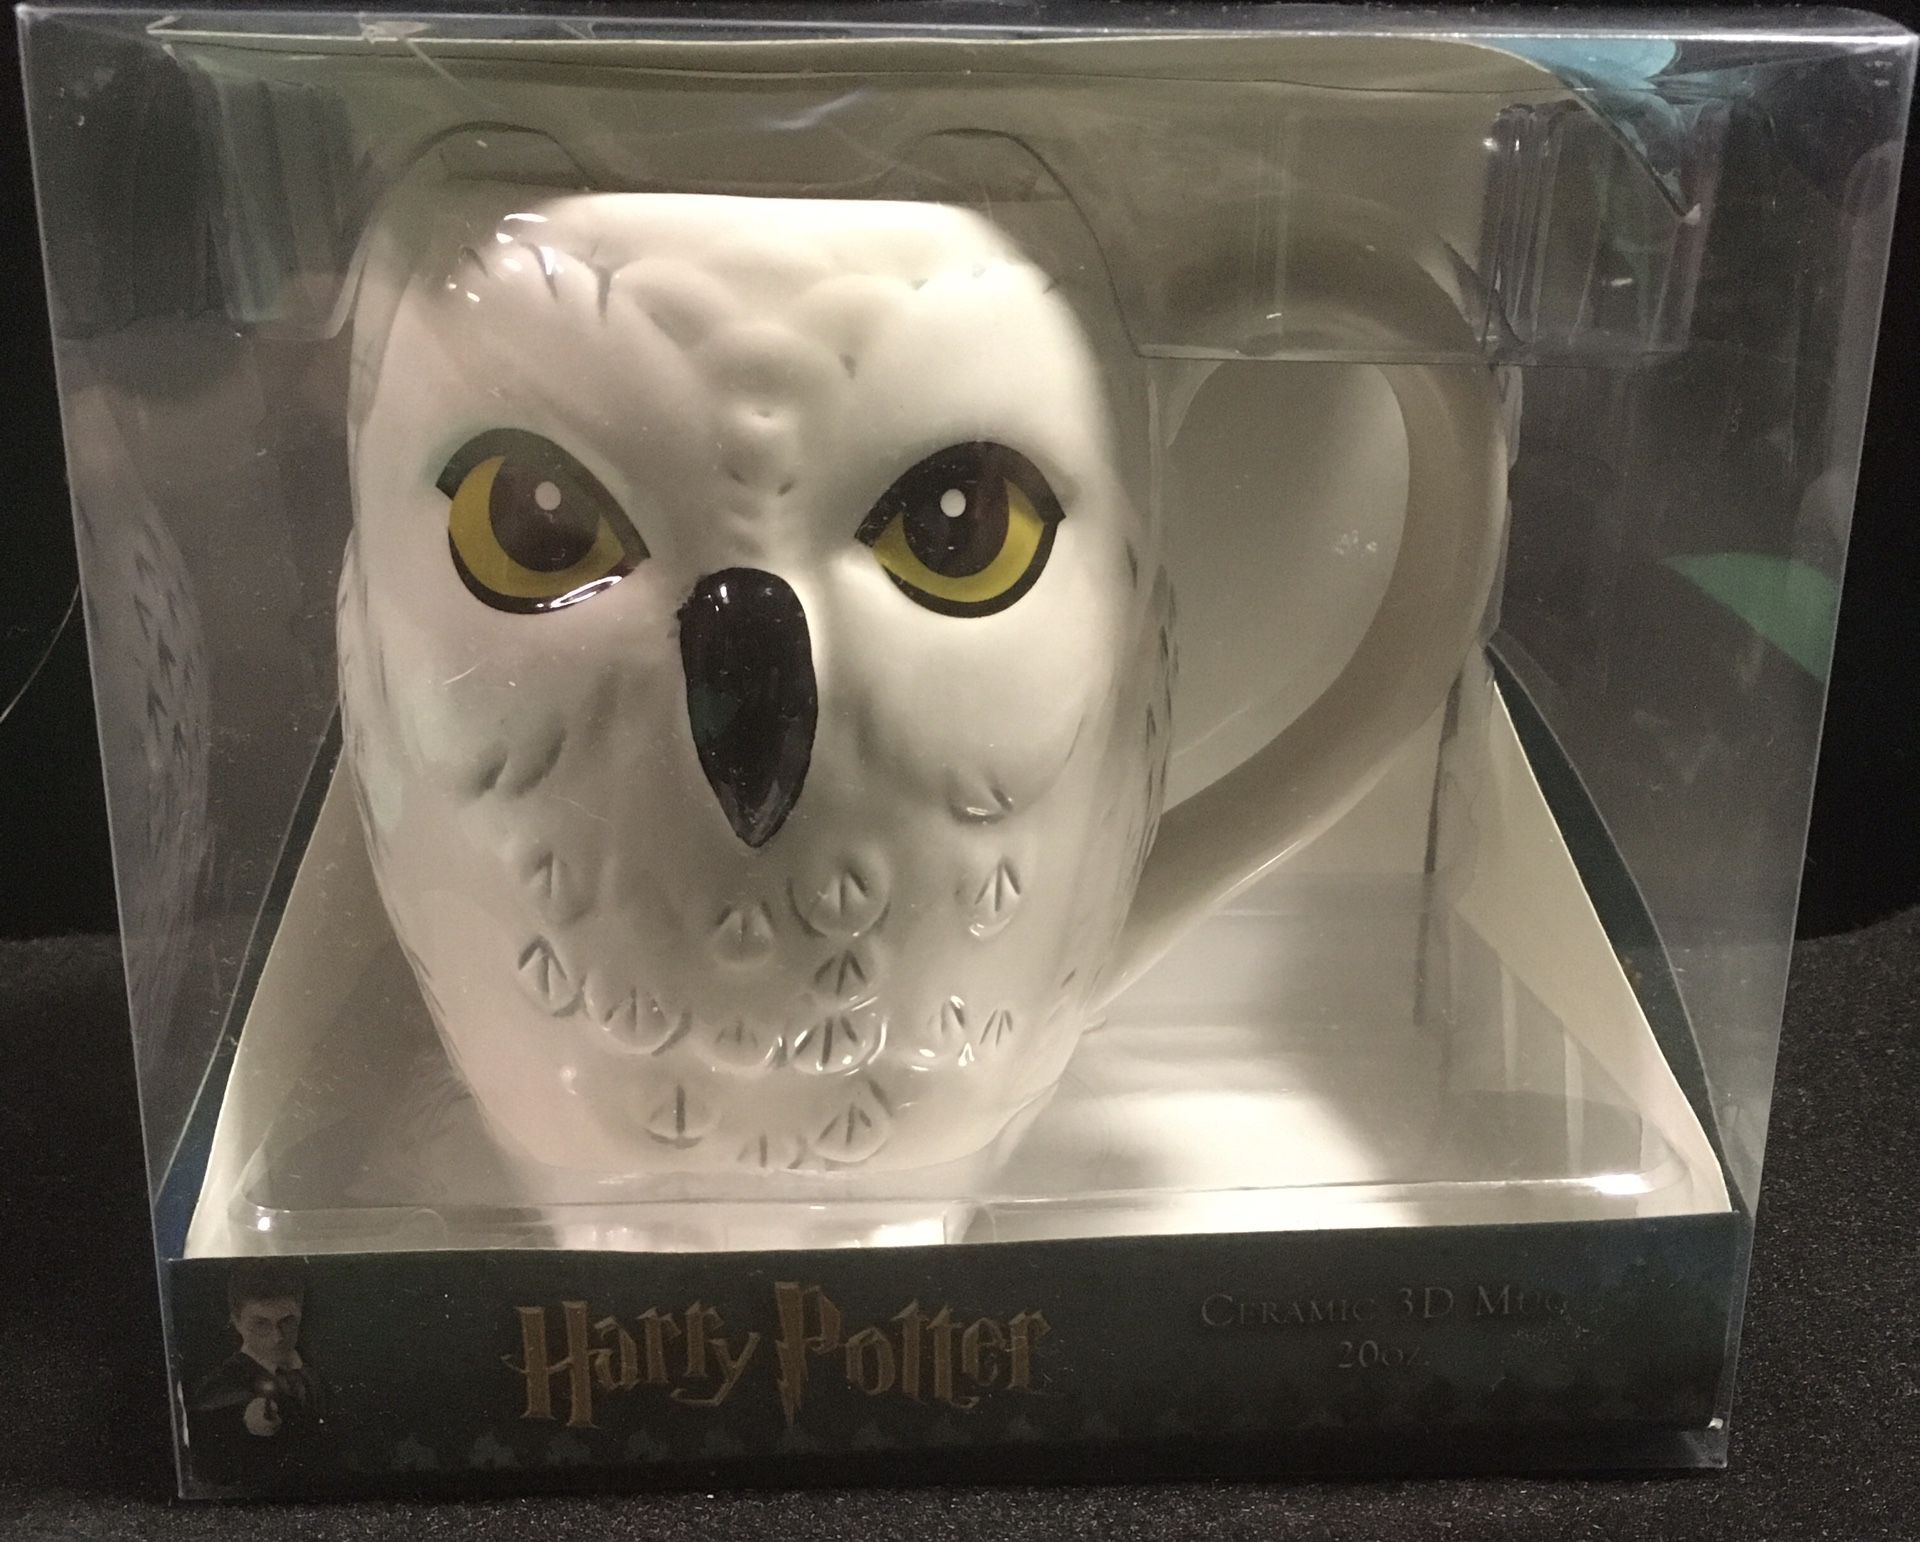 Brand new Harry Potter Hedwig Owl 20” Ceramic Coffee Tea Mug Limited Sculptured Collection